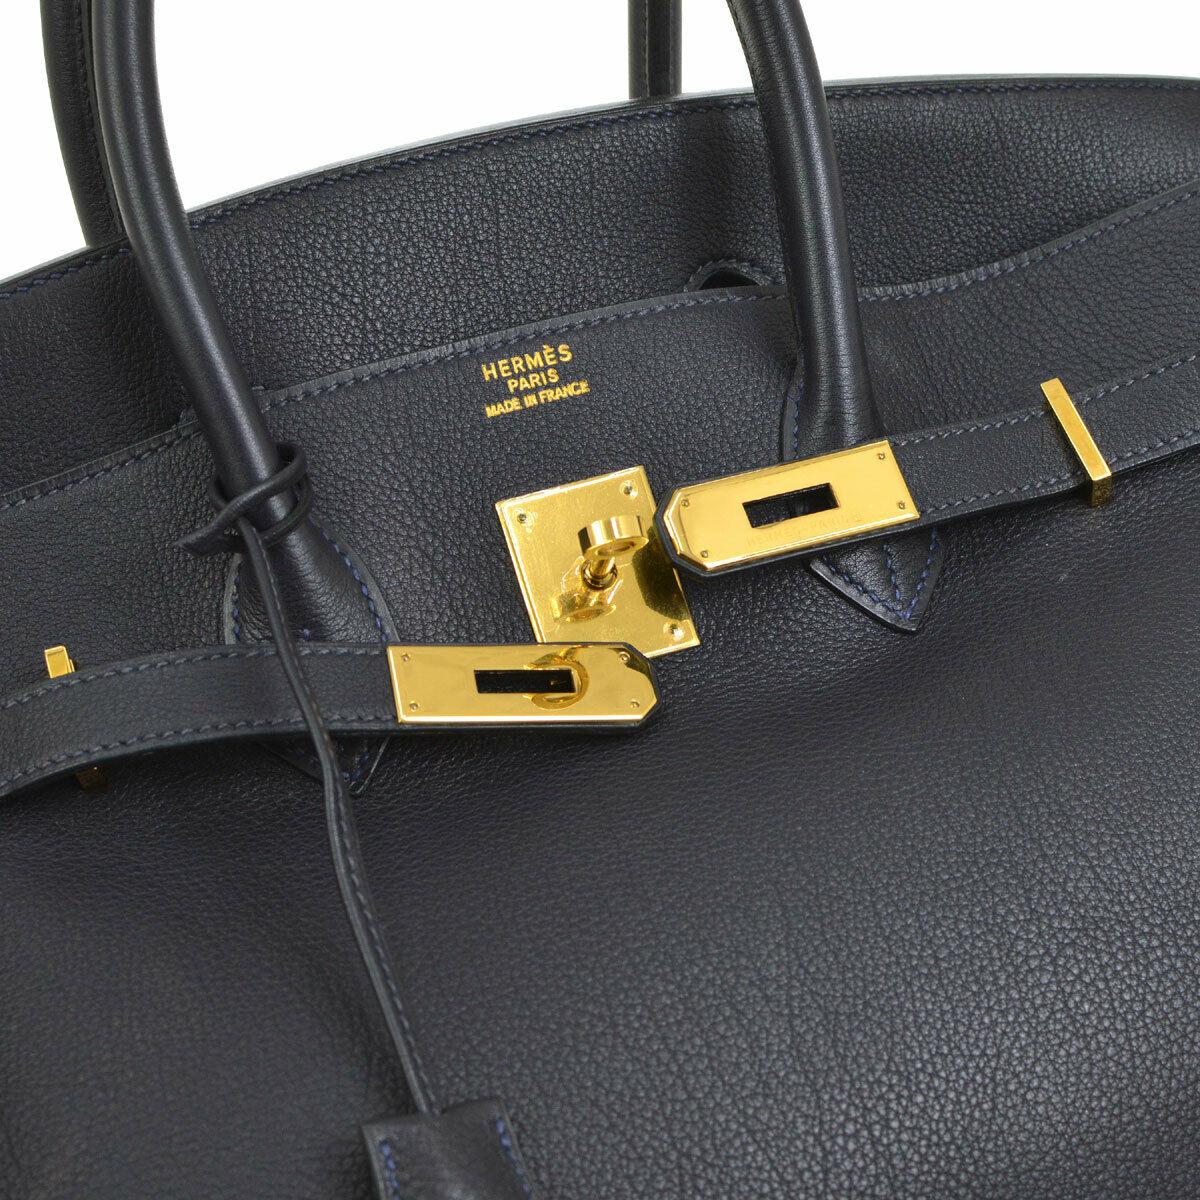 Hermes Birkin 35 Dark Navy Blue Leather Silver Gold Carryall Travel Top Handle Satchel Tote

Leather
Gold tone hardware
Leather lining
Made in France
Handle drop 4.25